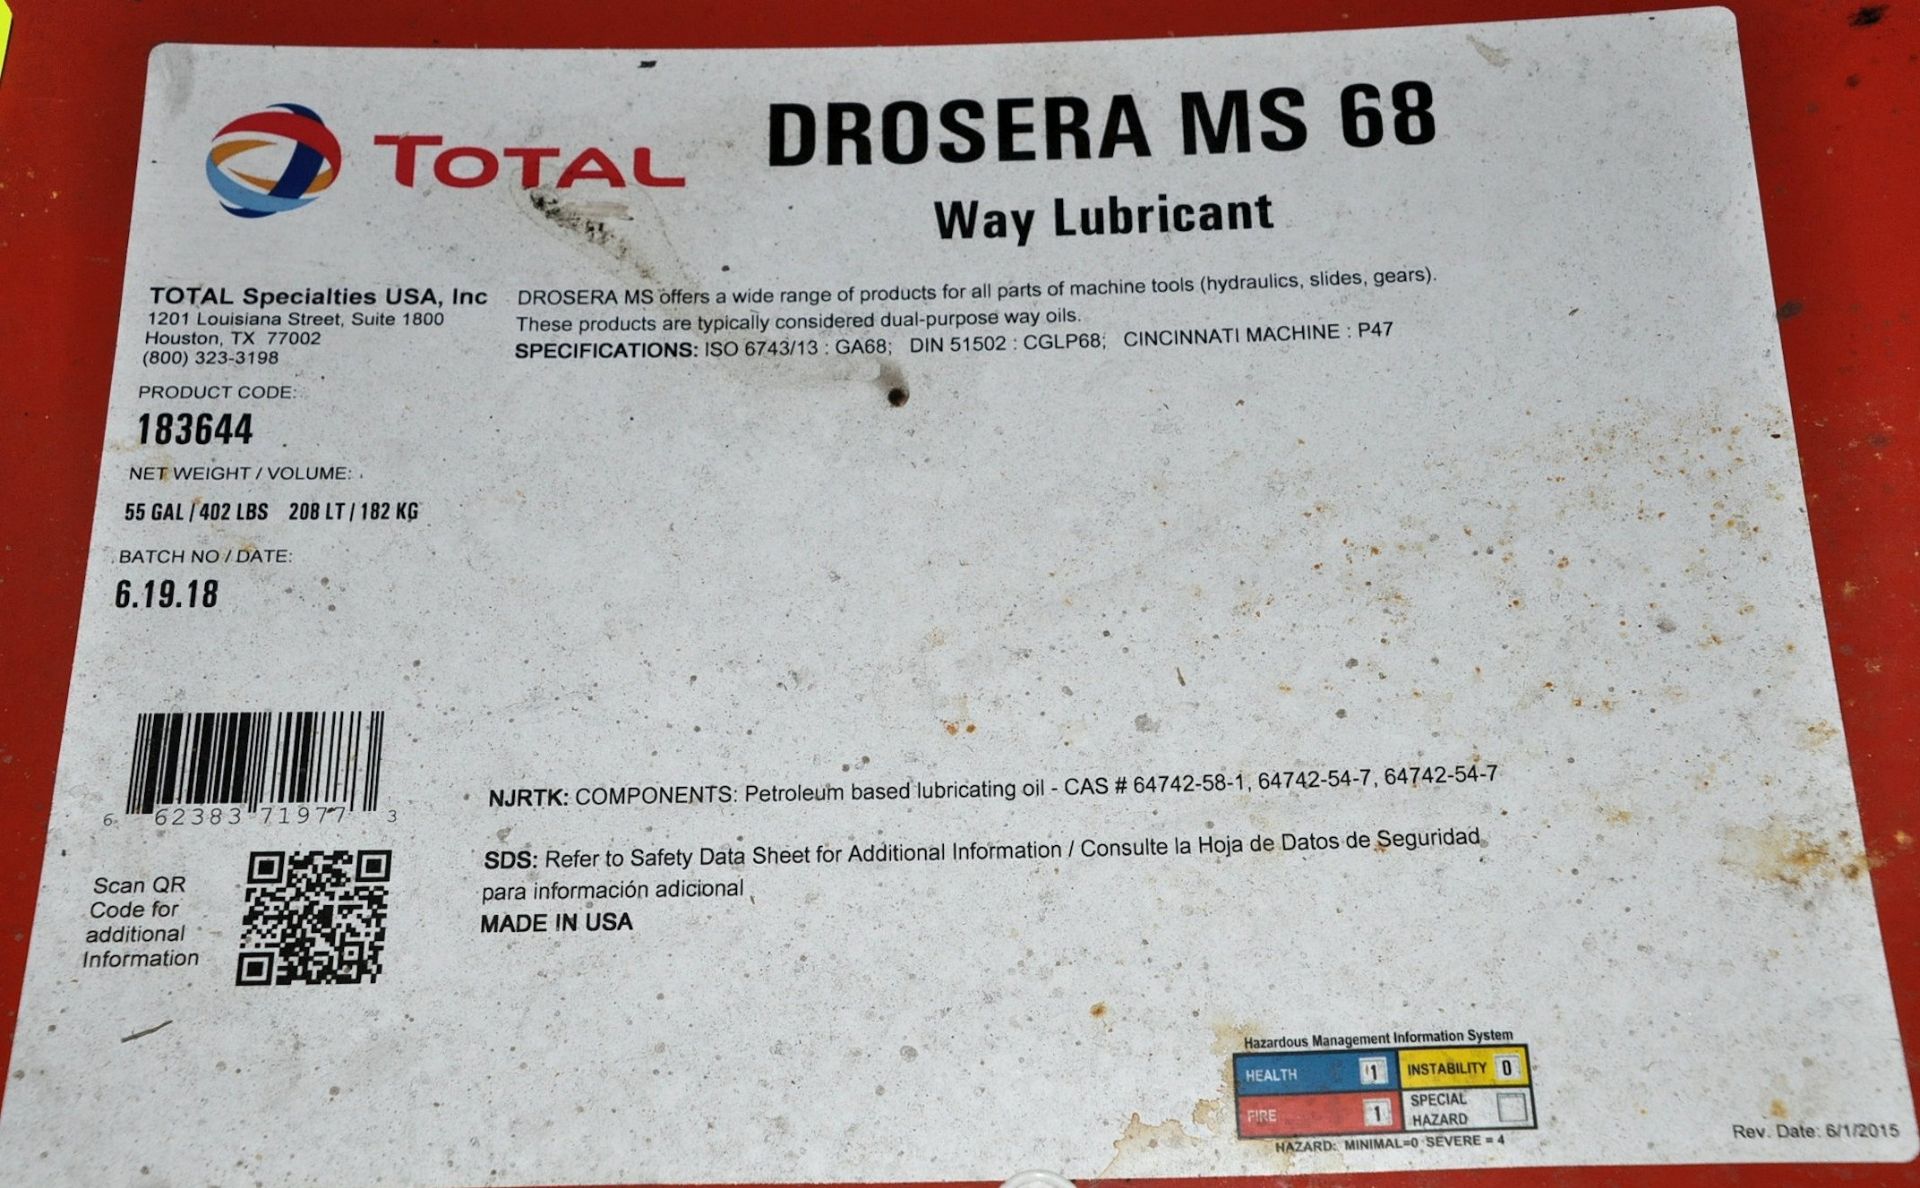 Lot-(2) 55-Gallon Drums of Total Drosera MS 68 Way Lubricant, (Oils Storage Building), (Yellow Tag) - Image 2 of 2